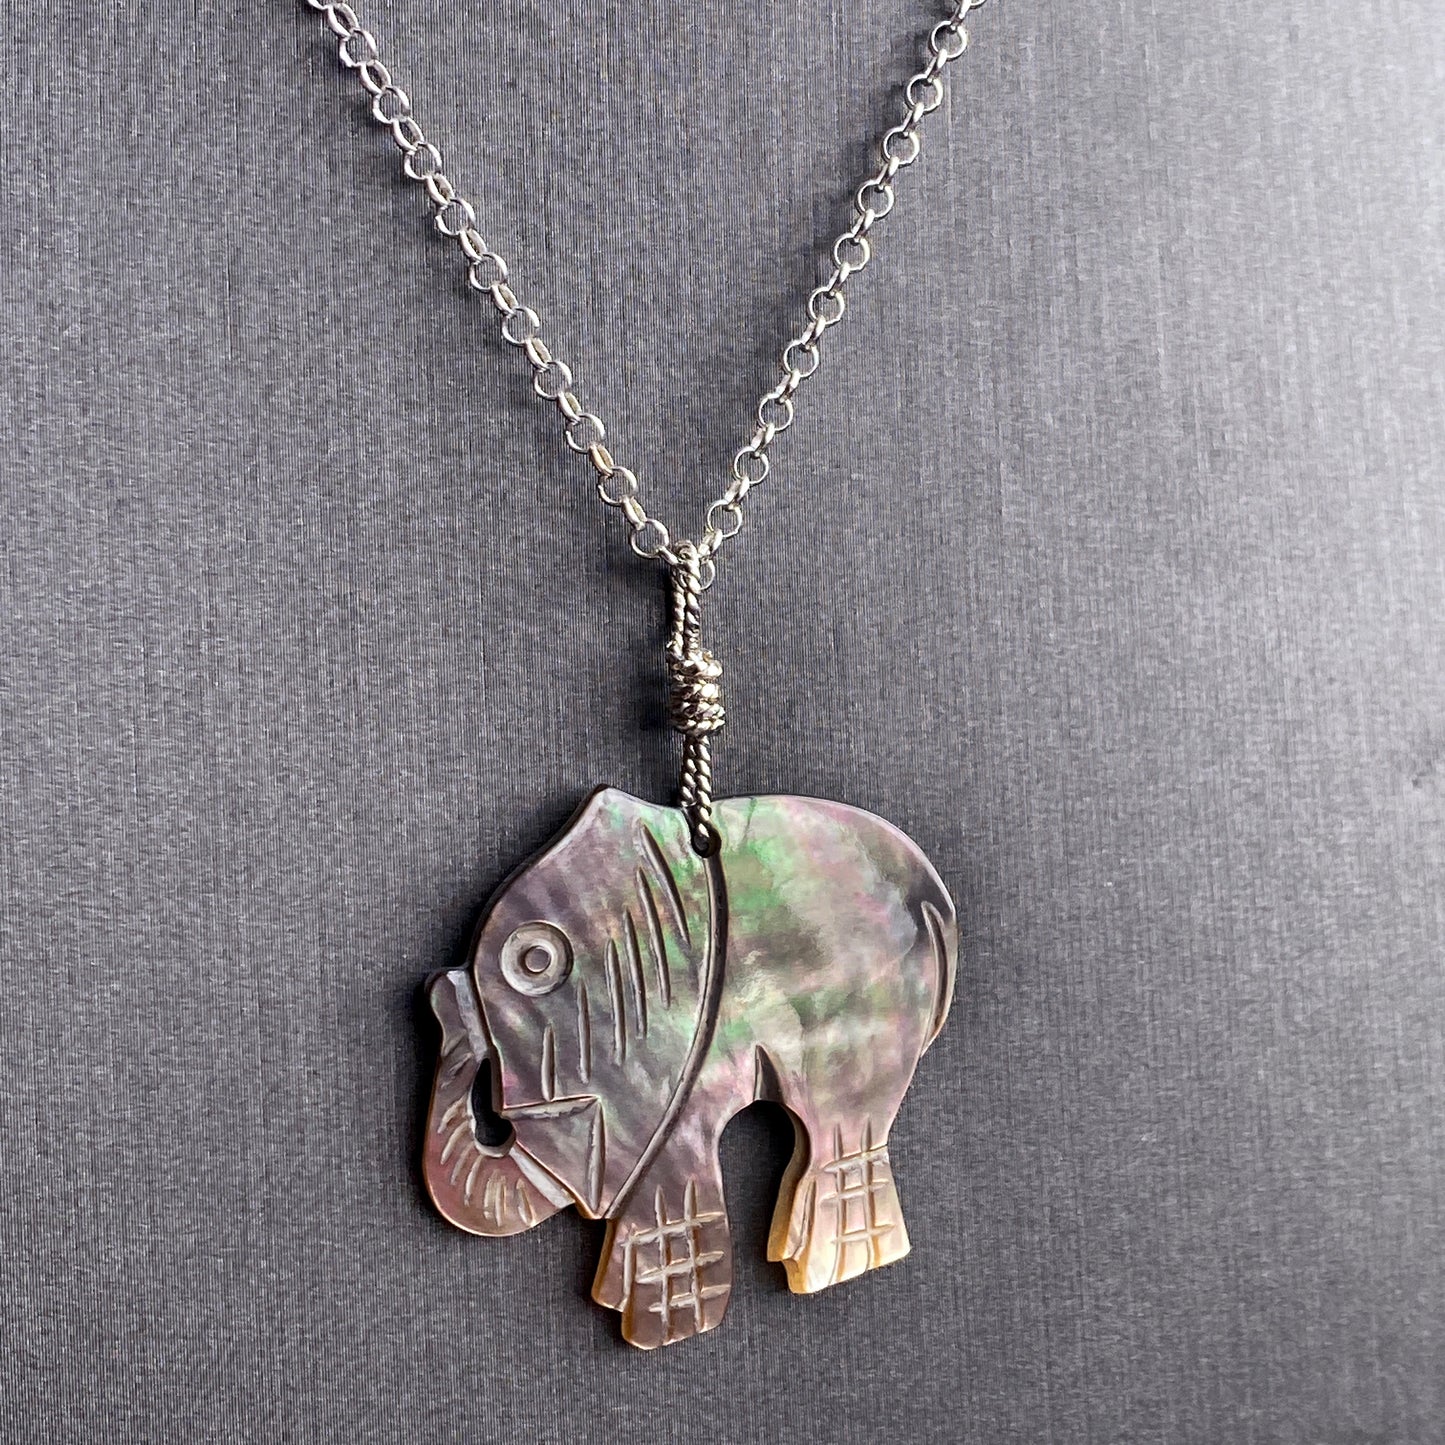 Mother of Pearl carved elephant pendant necklace of Sterling Silver